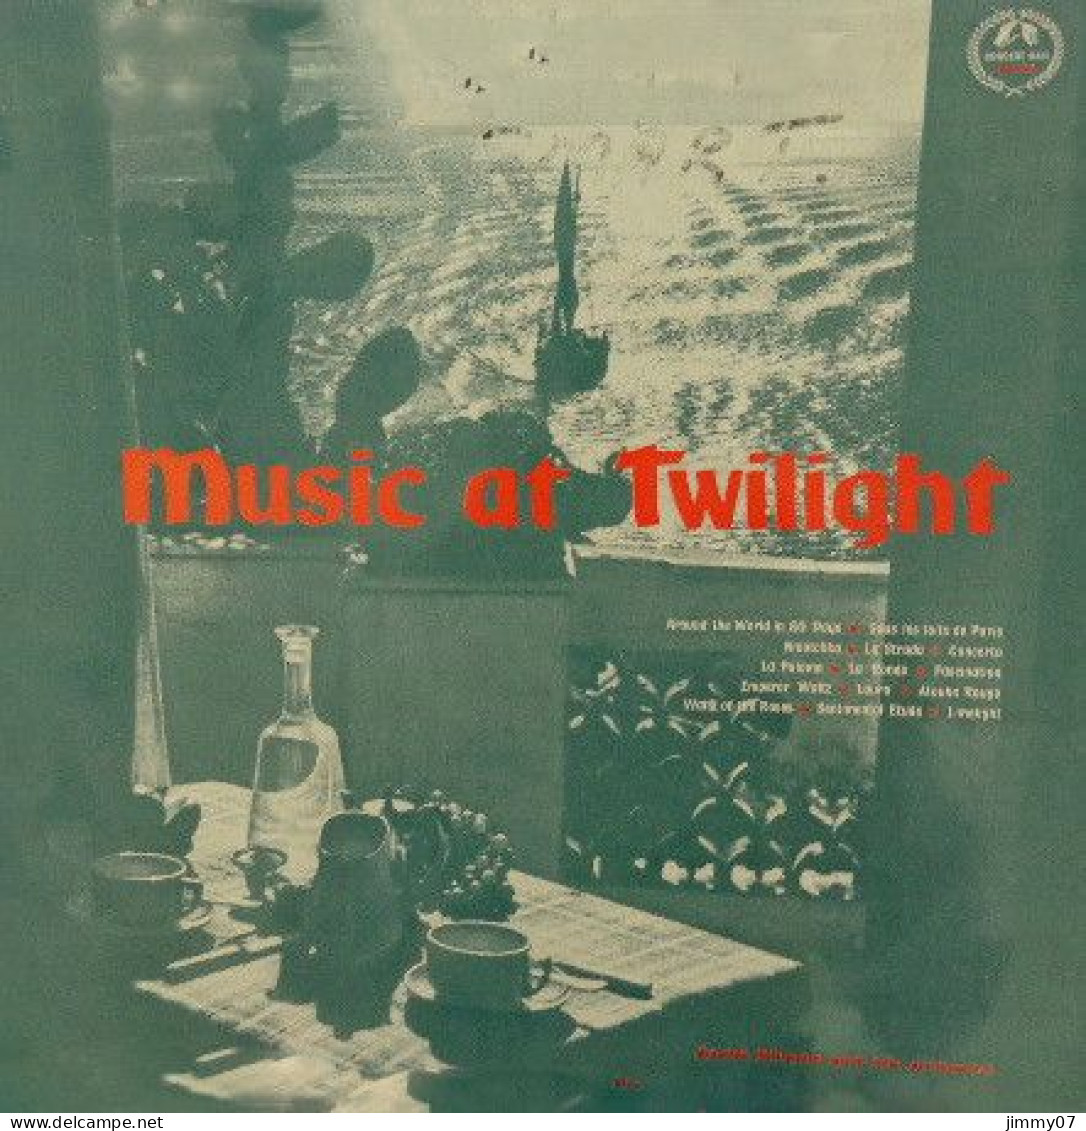 Andre Silvano And His Orchestra - Music At Twilight (LP) - Klassik